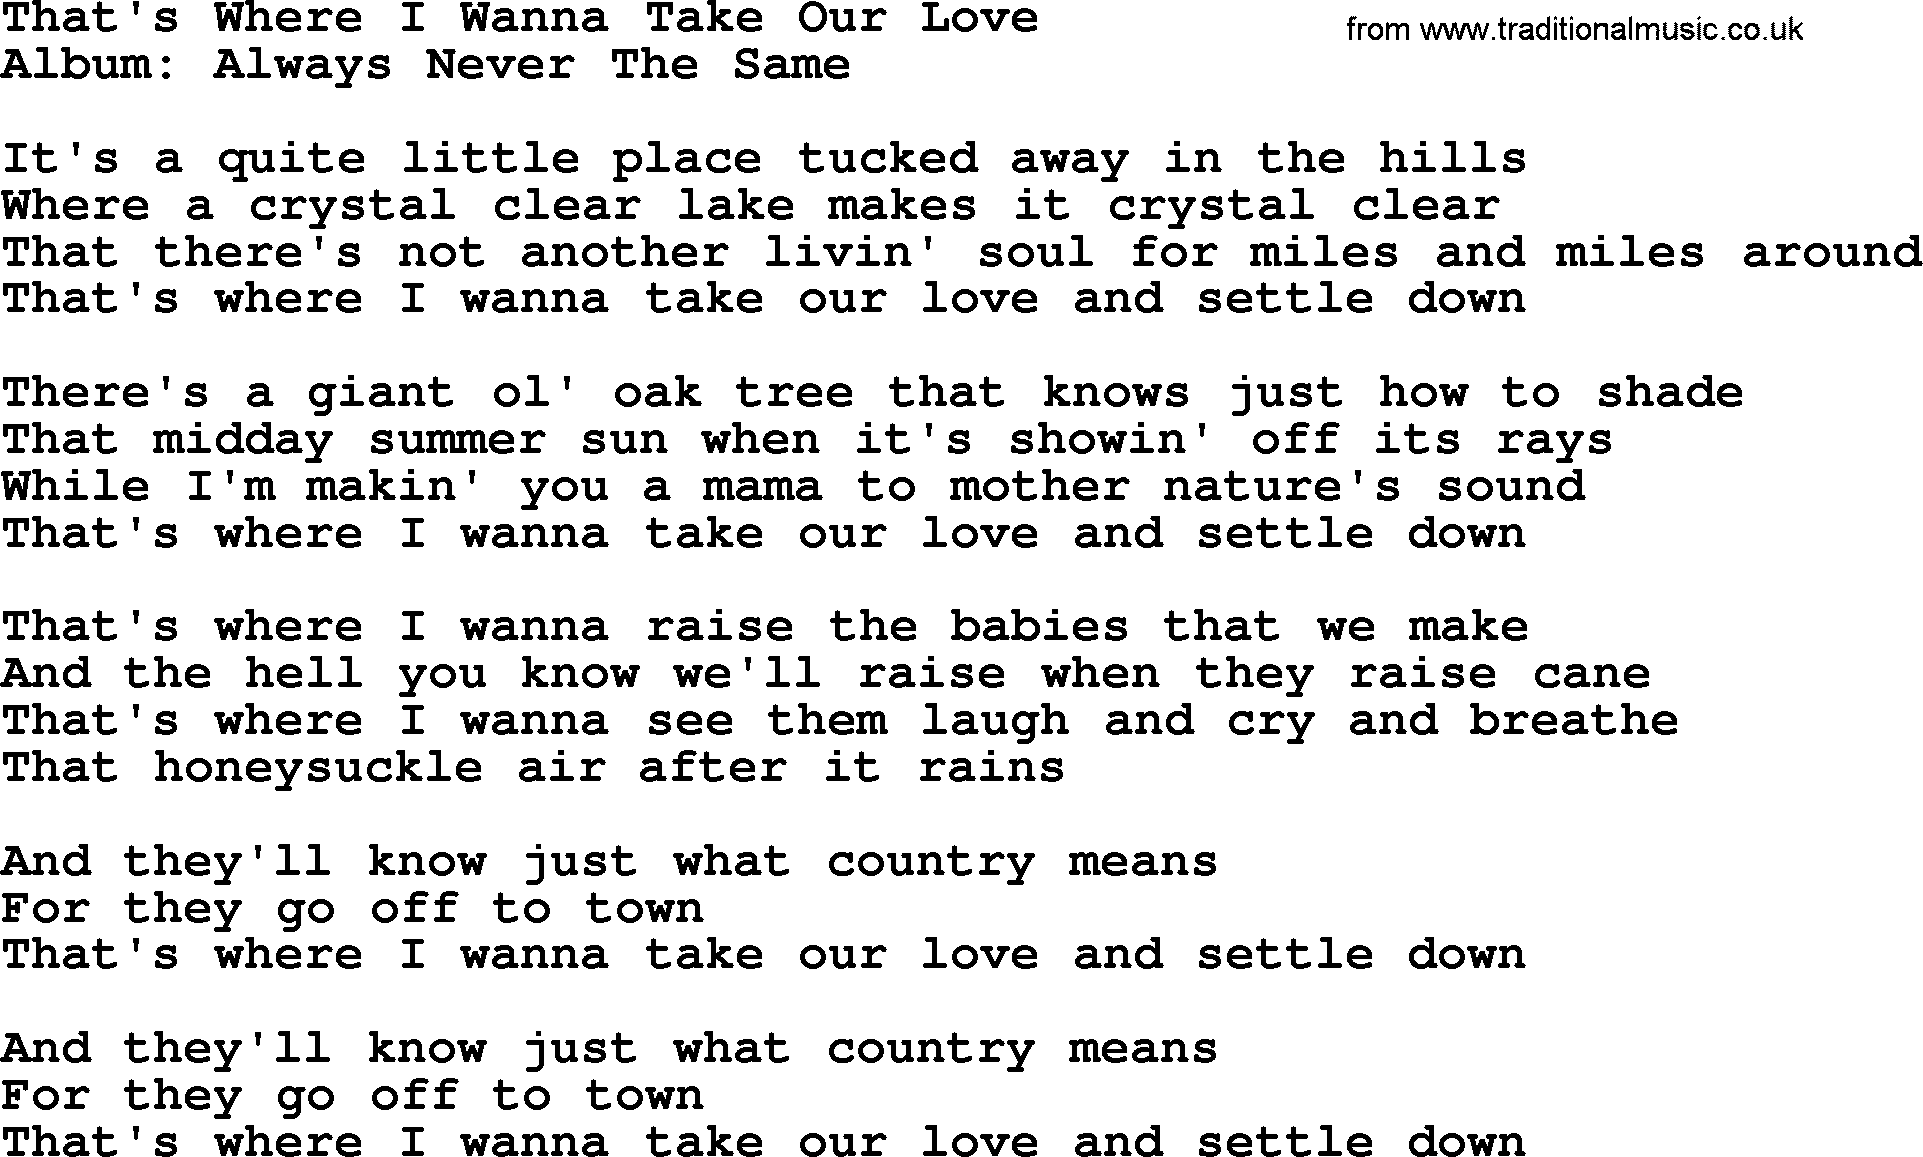 George Strait song: That's Where I Wanna Take Our Love, lyrics